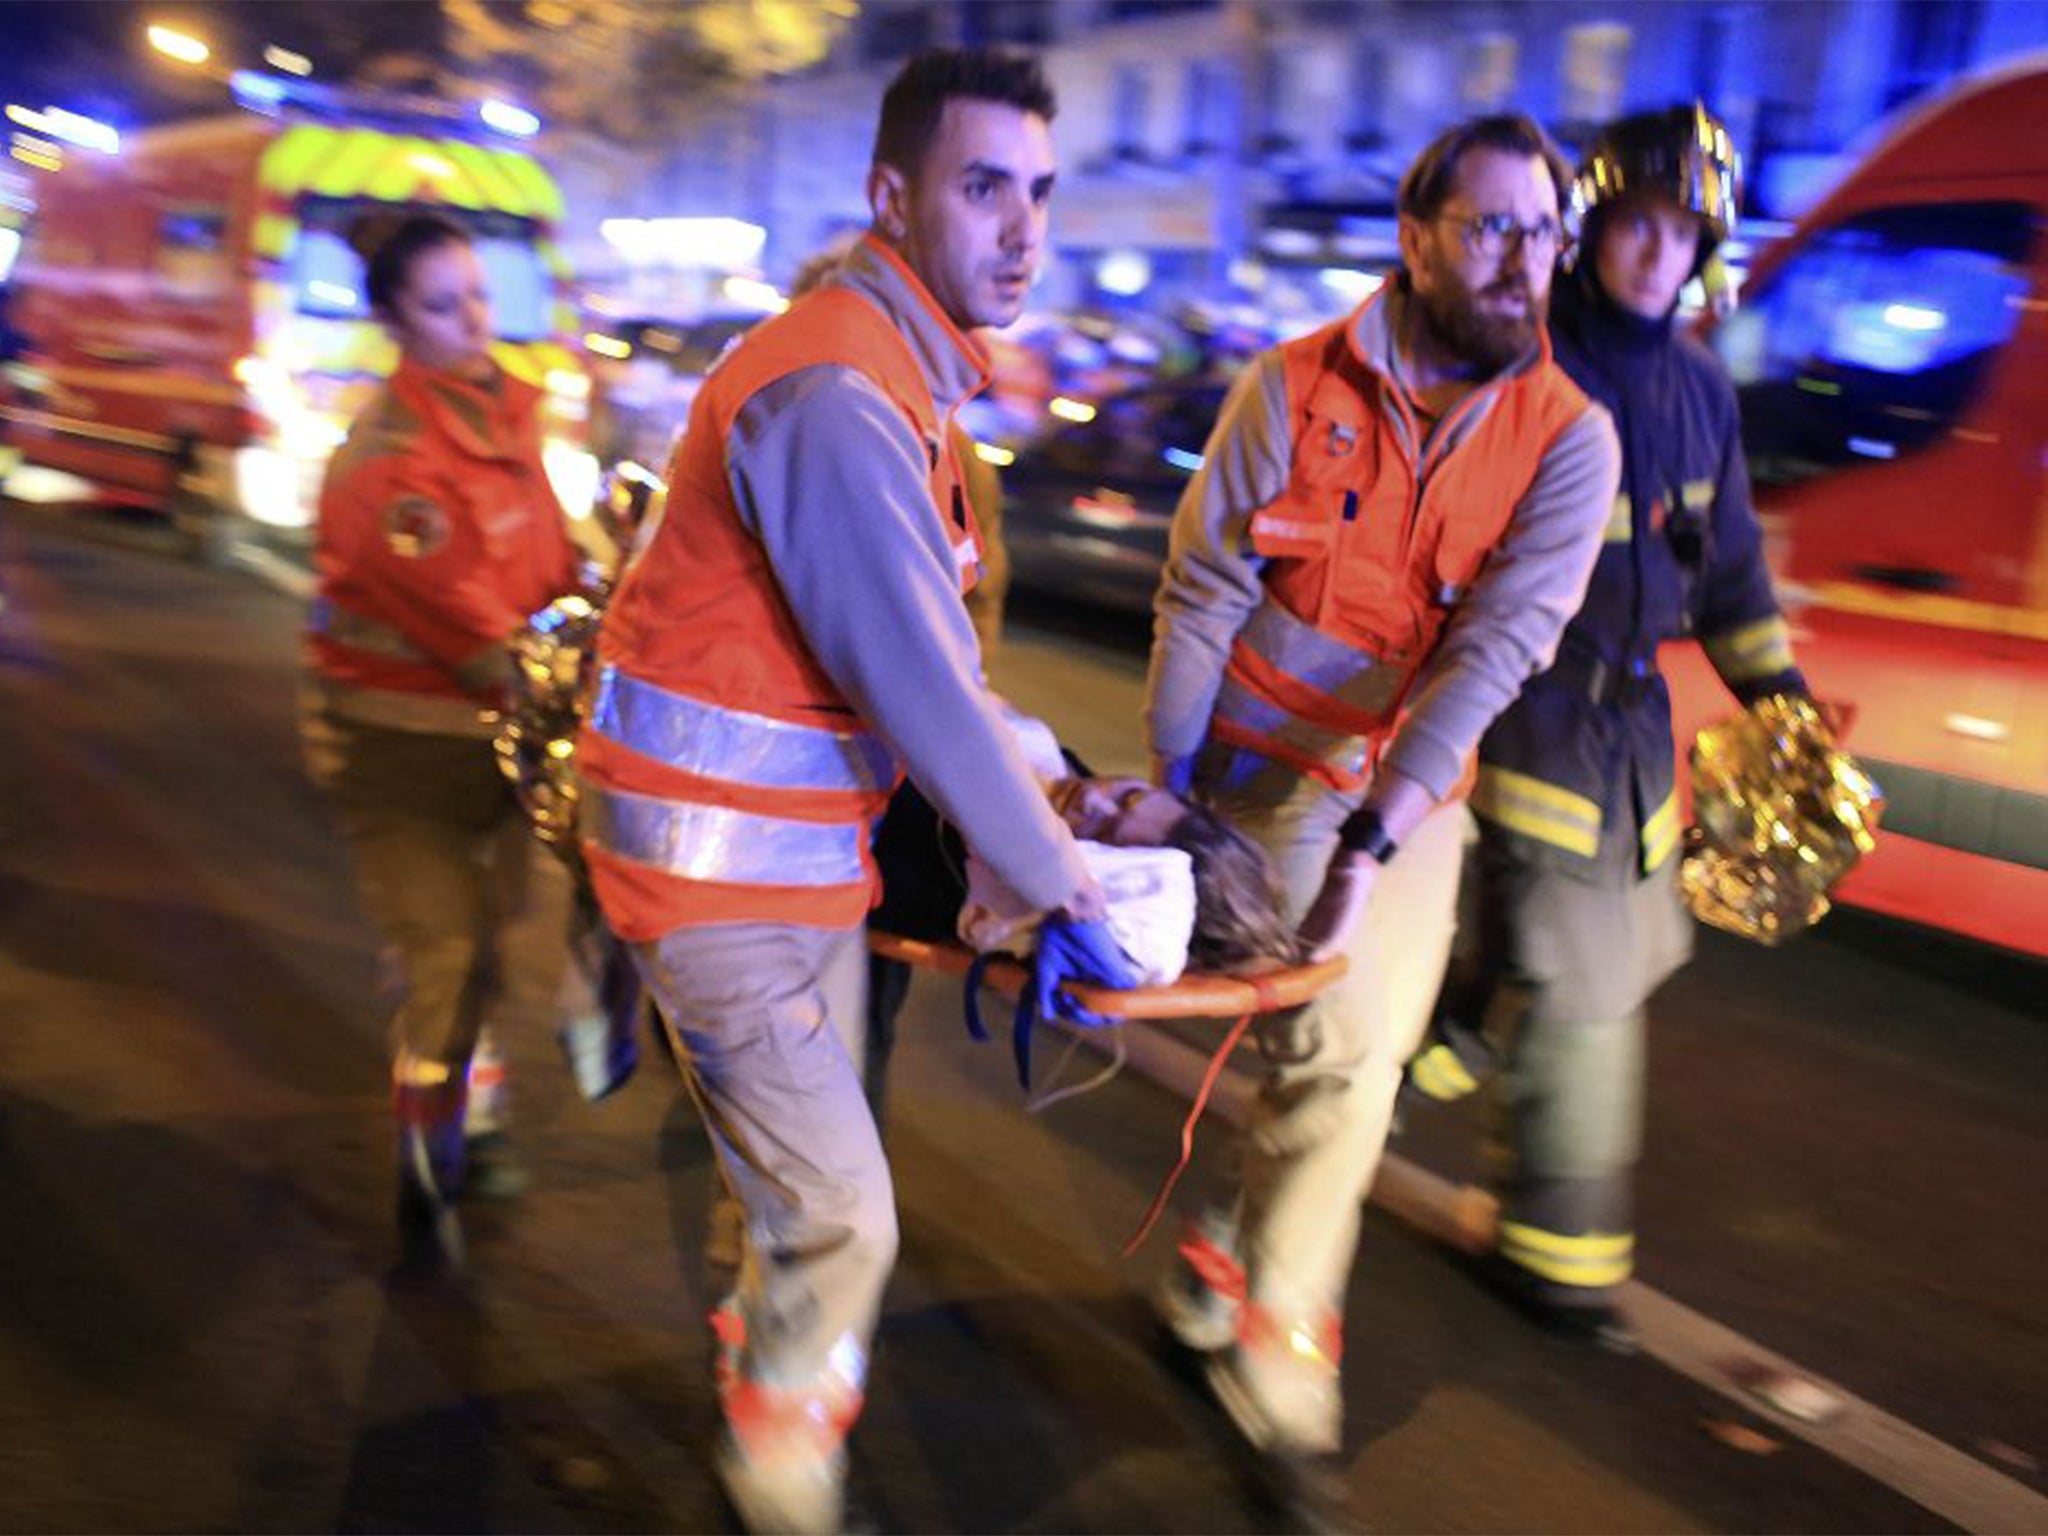 A woman is evacuated from the Bataclan theater after a shooting in Paris